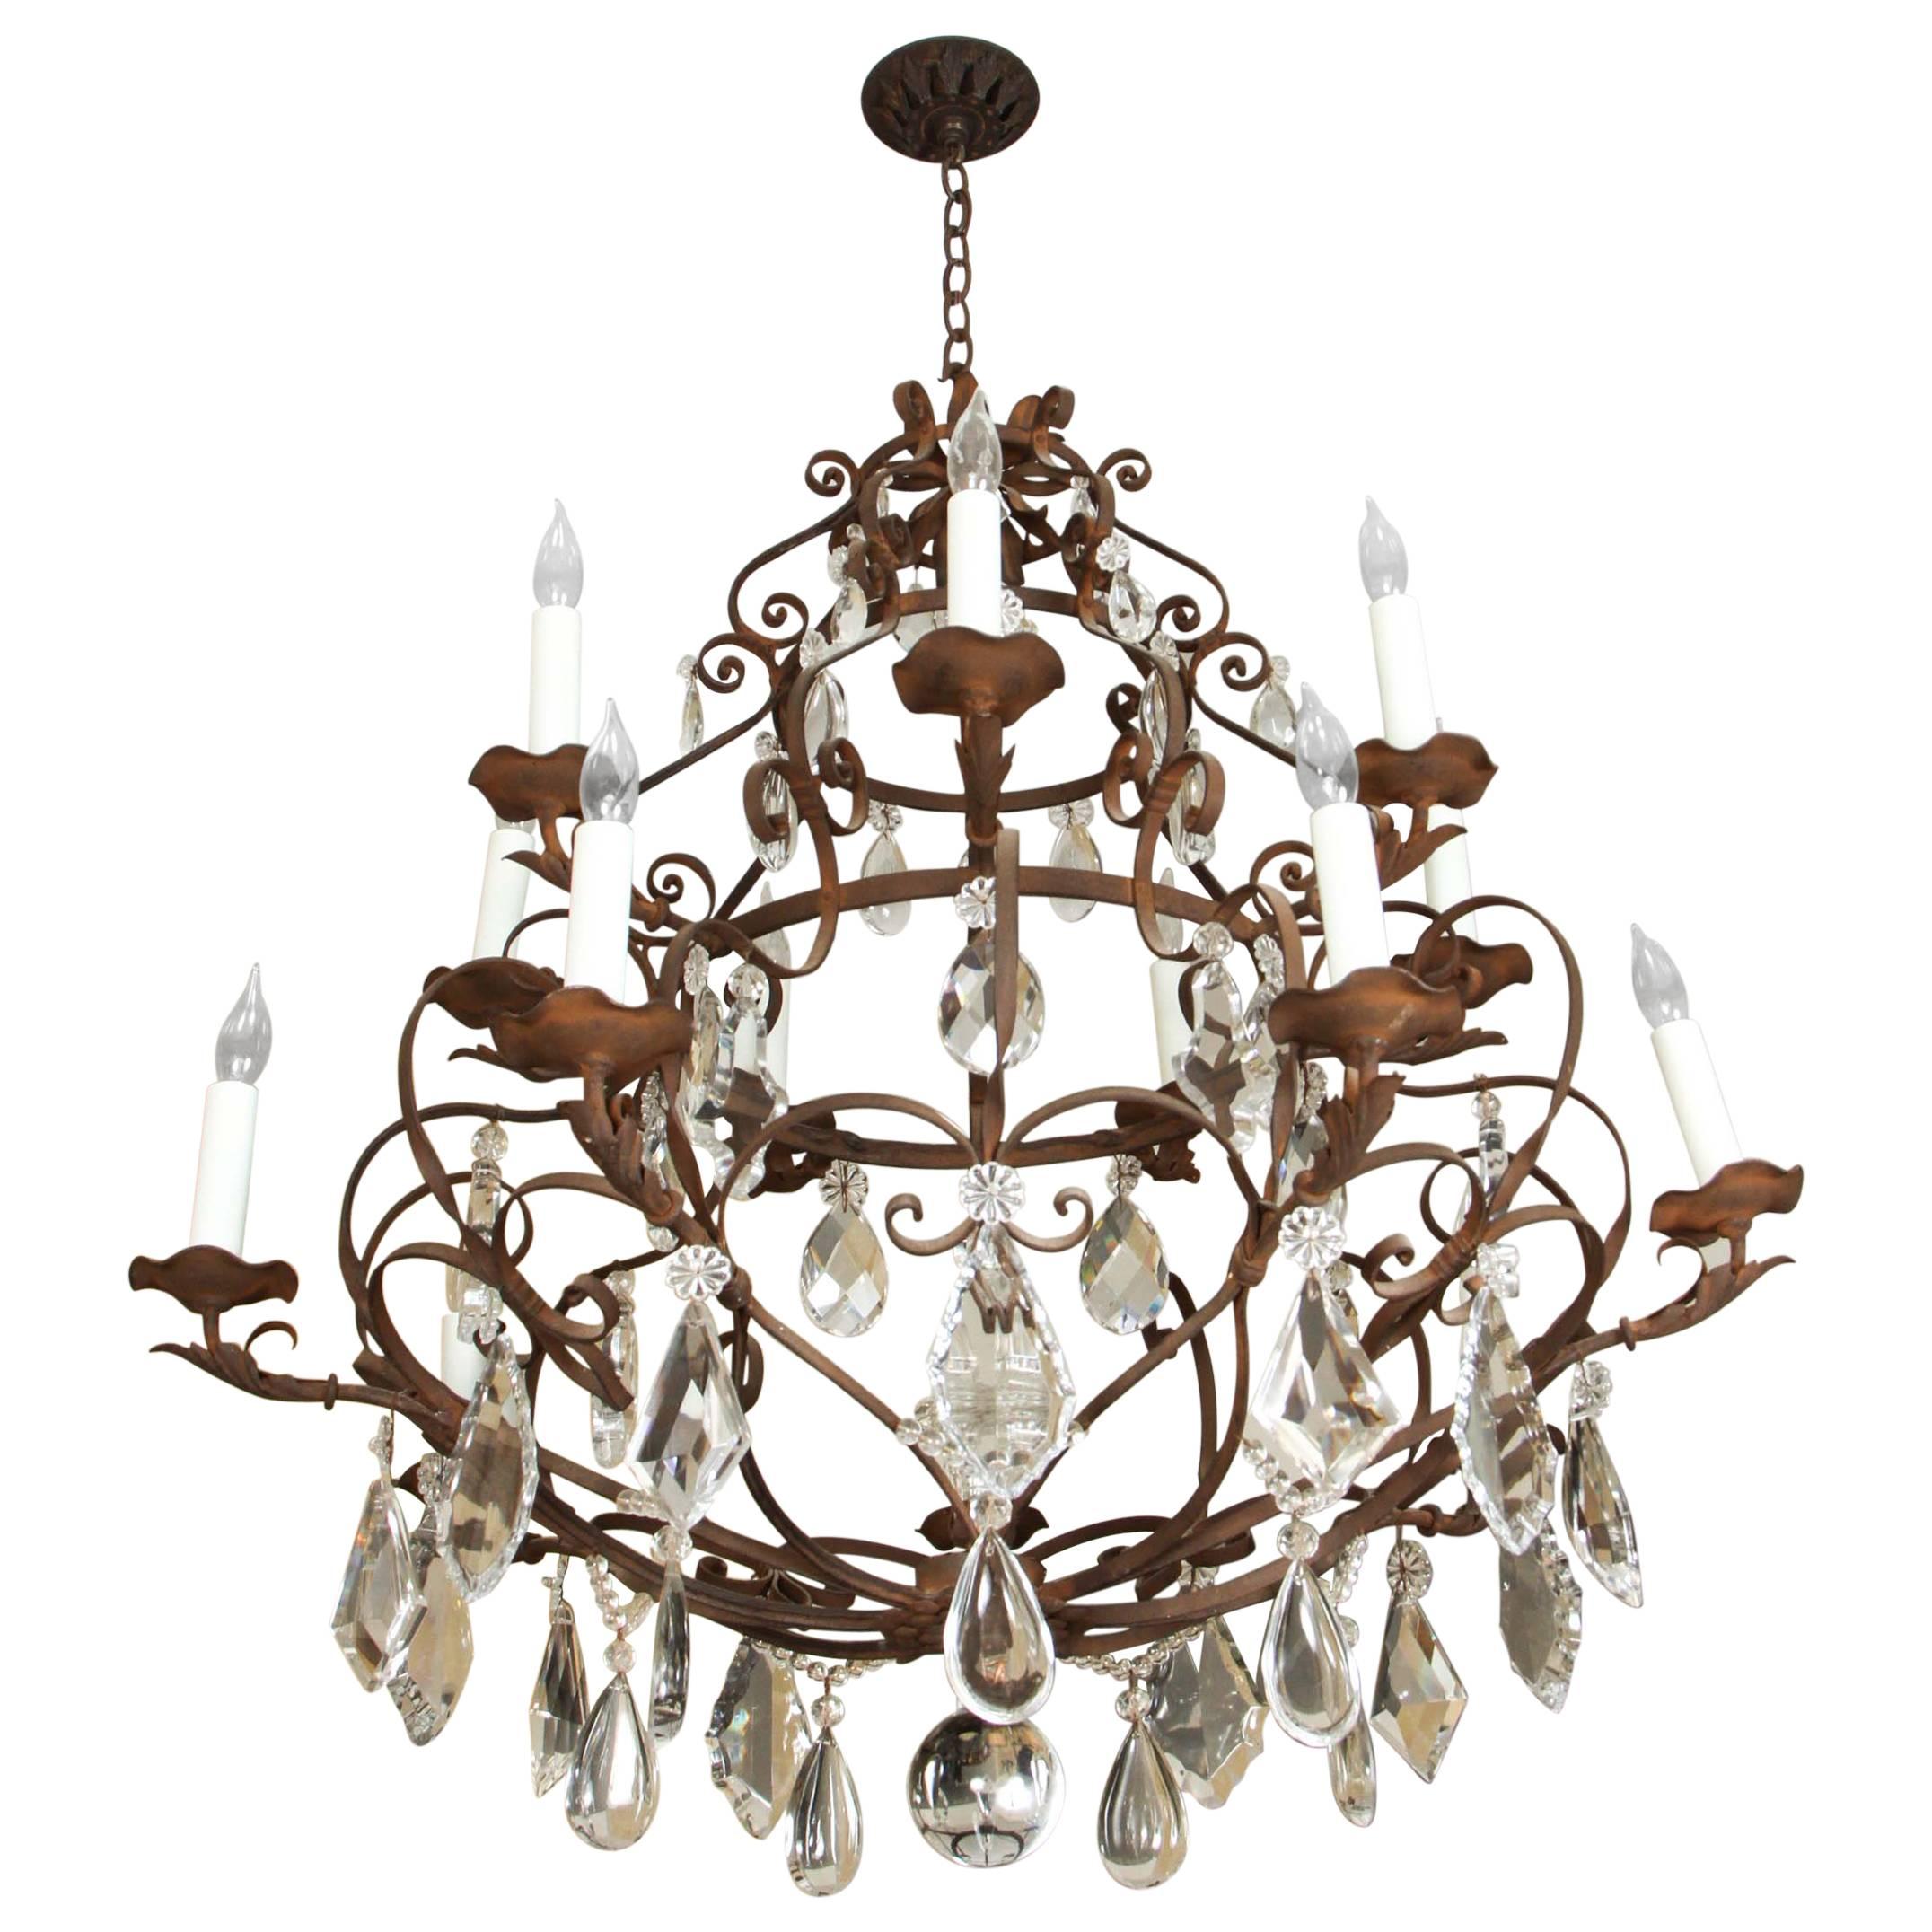 Grand Fourteen-Light Iron and Crystal Chandelier